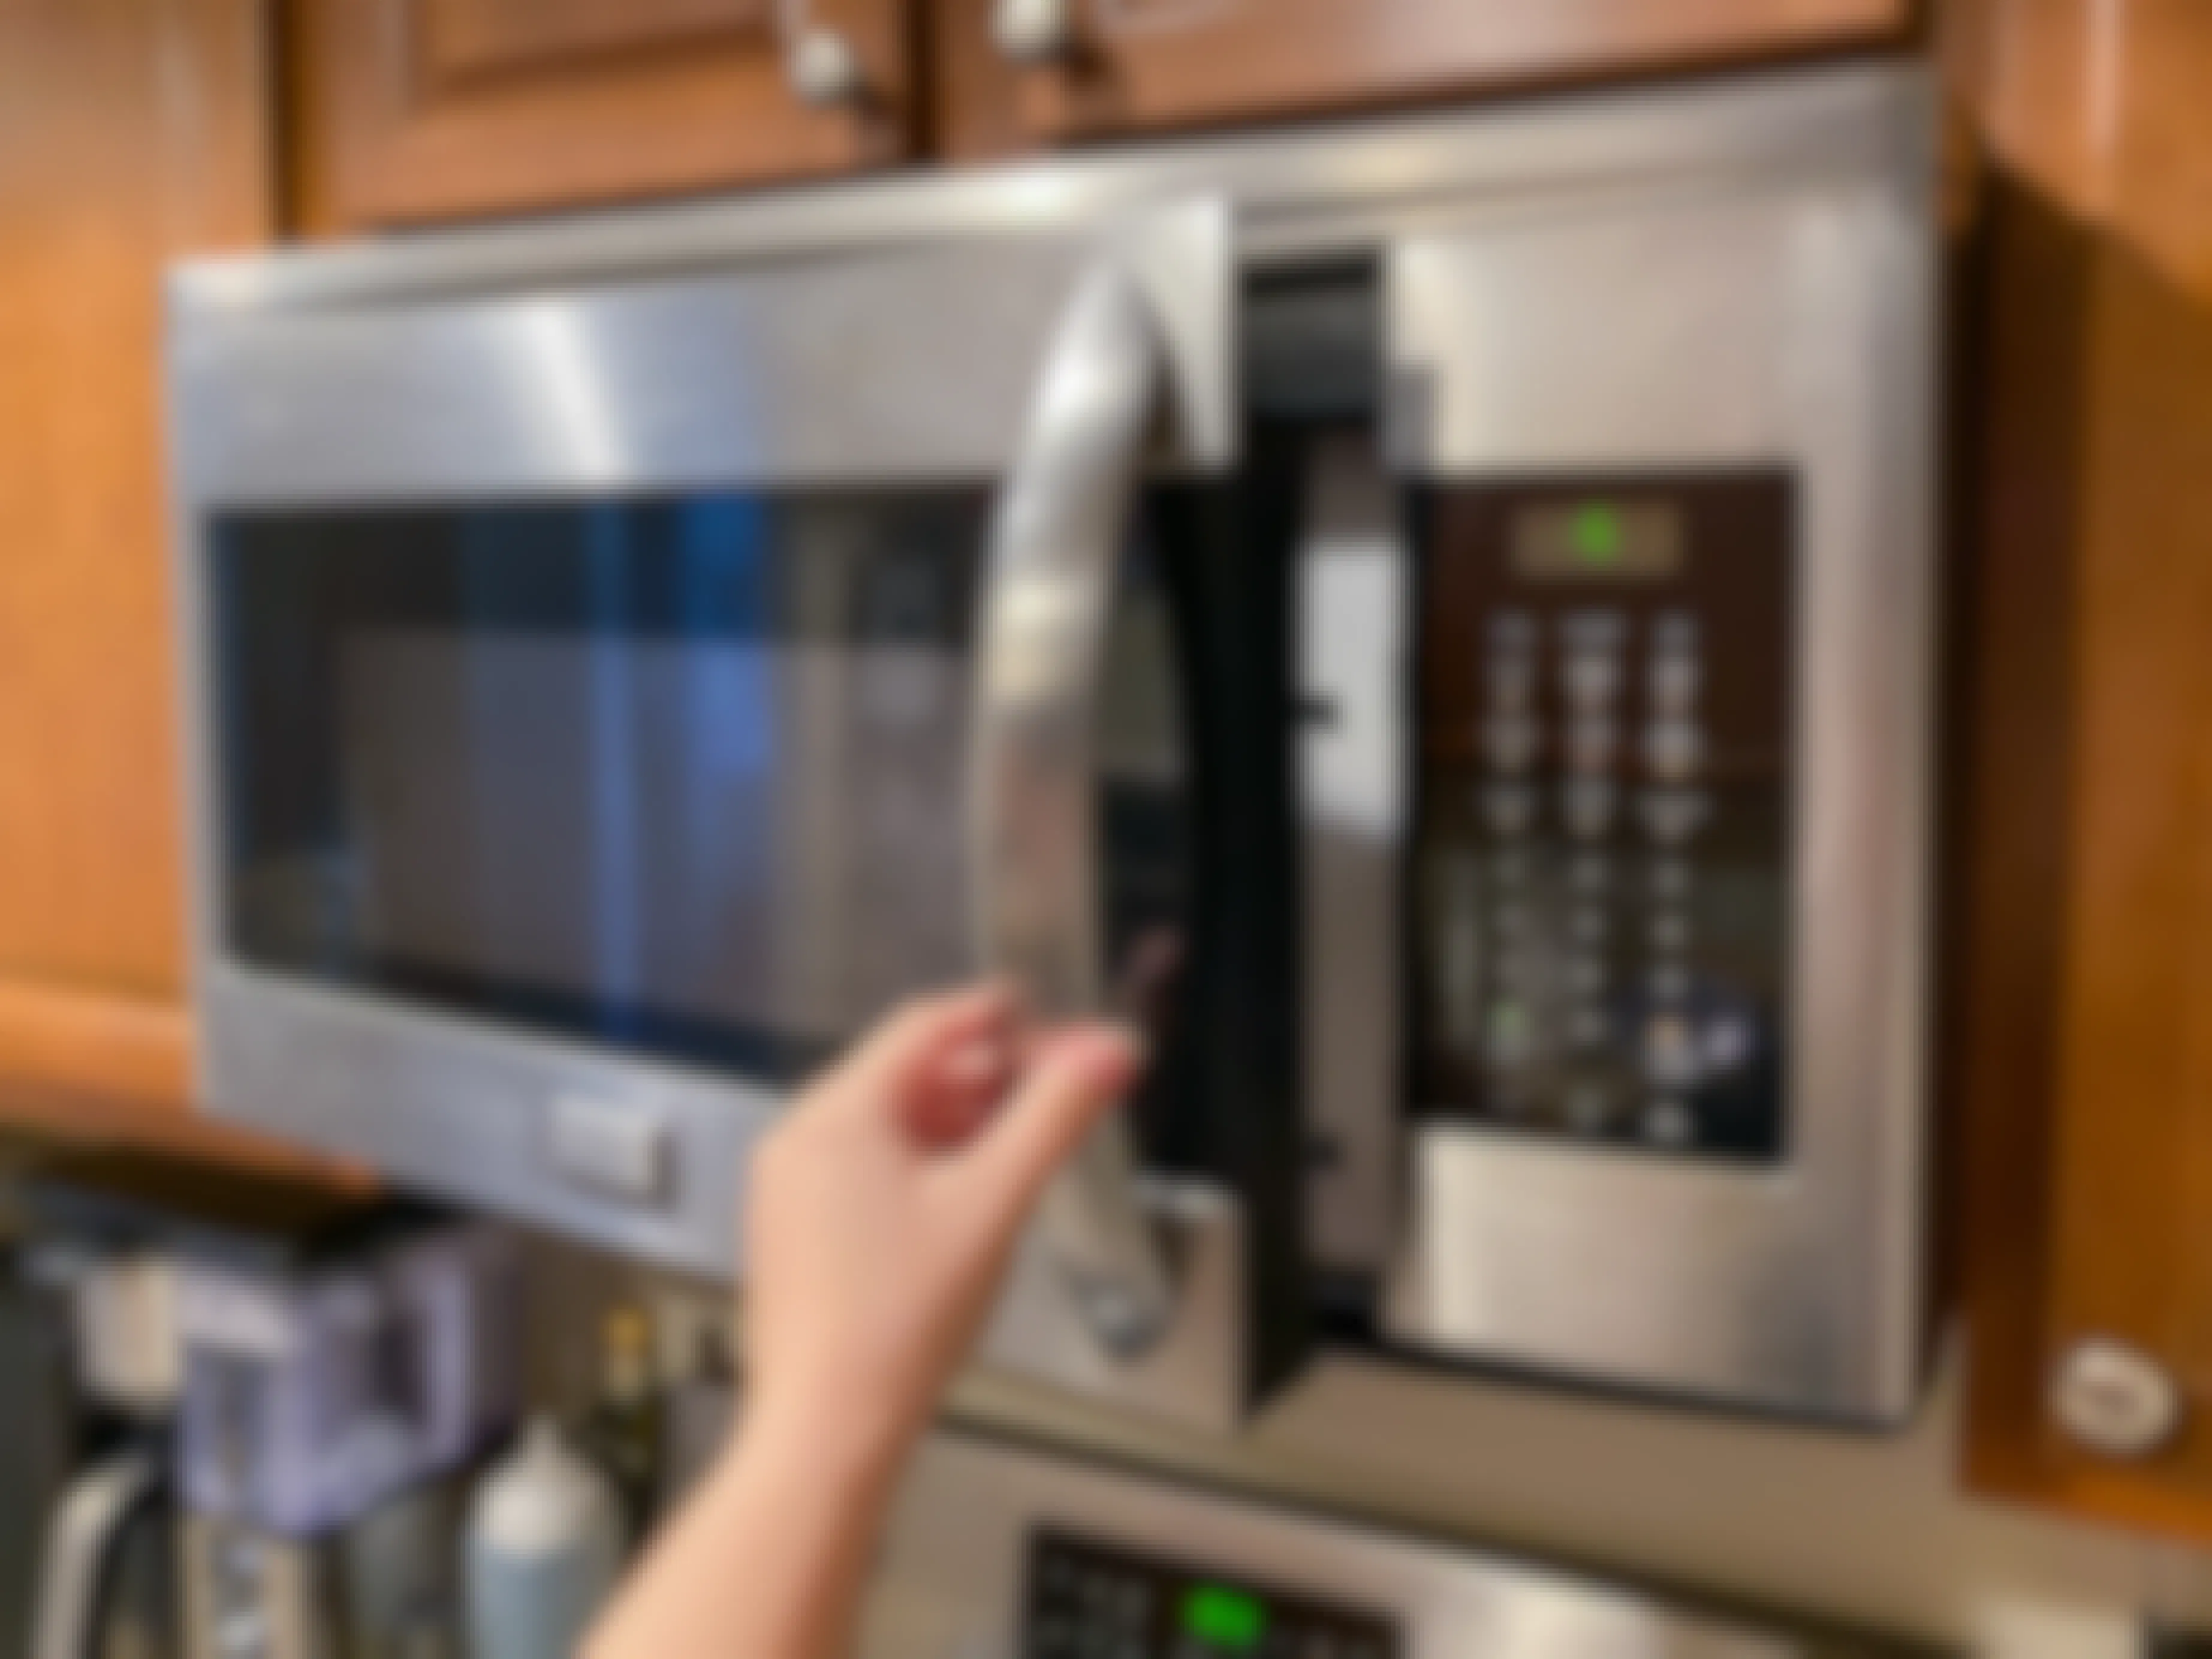 A person's hand opening the door of a mounted microwave.